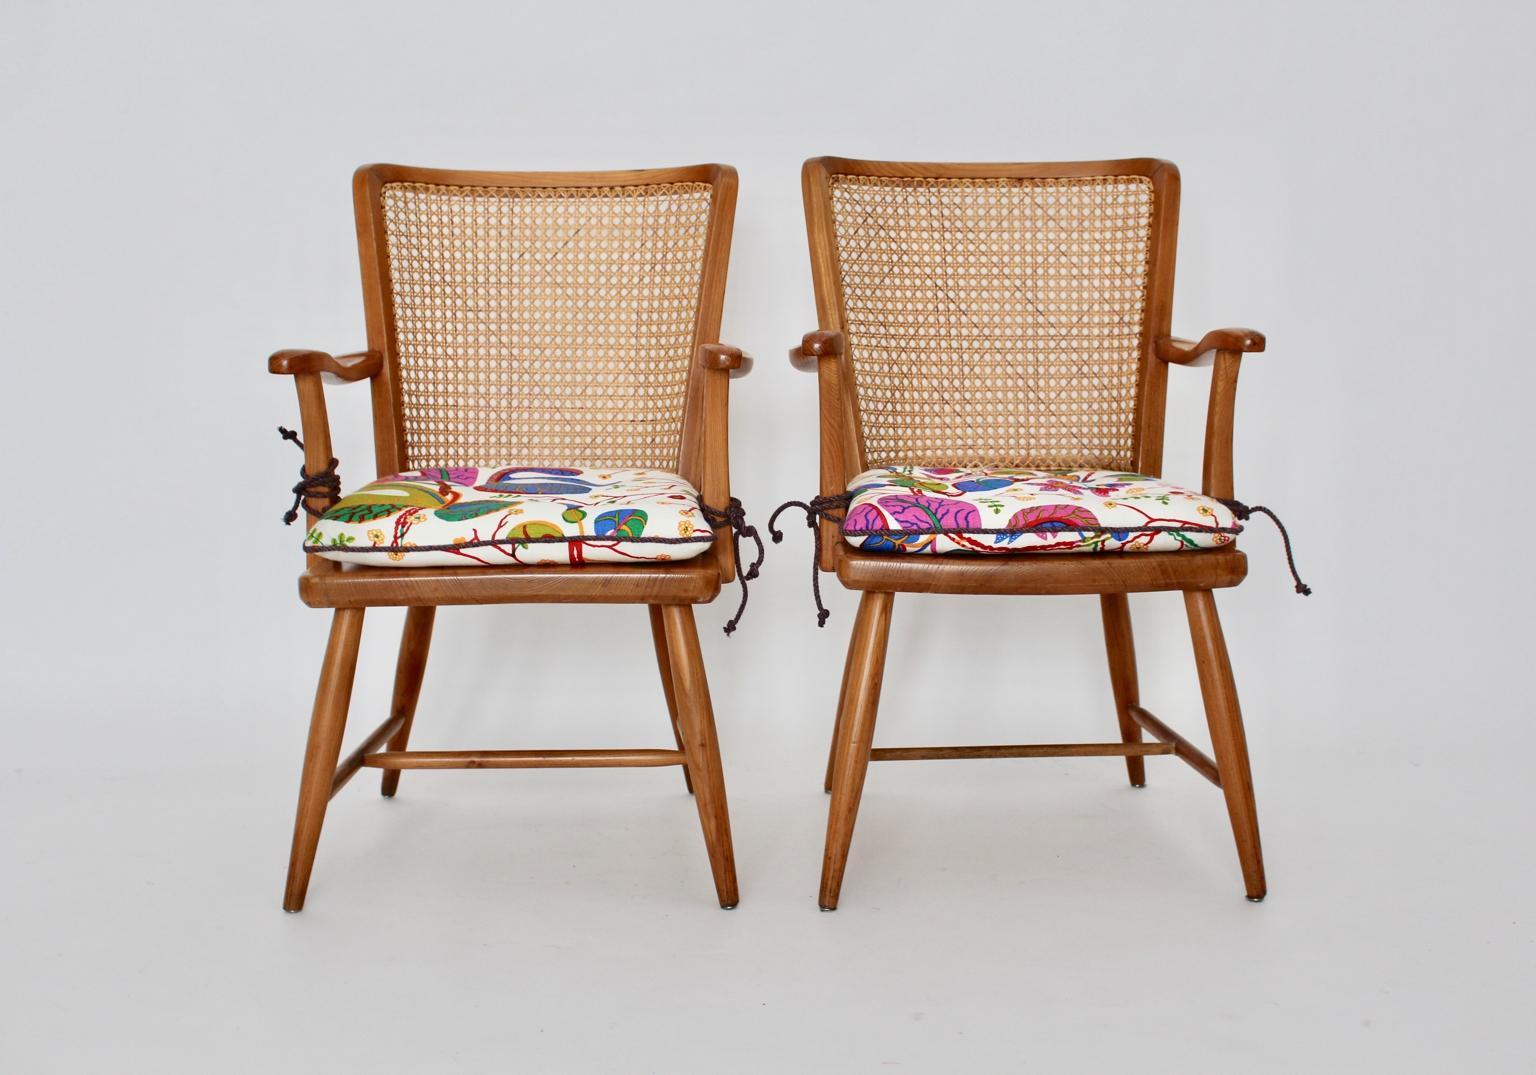 Art Deco two armchairs from ash wood and Viennese mesh by Josef Frank, Vienna circa 1928.
The armchairs show a Viennese mesh structure at the back. Furthermore the armchairs features slightly curved armrests.
The loose cushions are renewed by hand